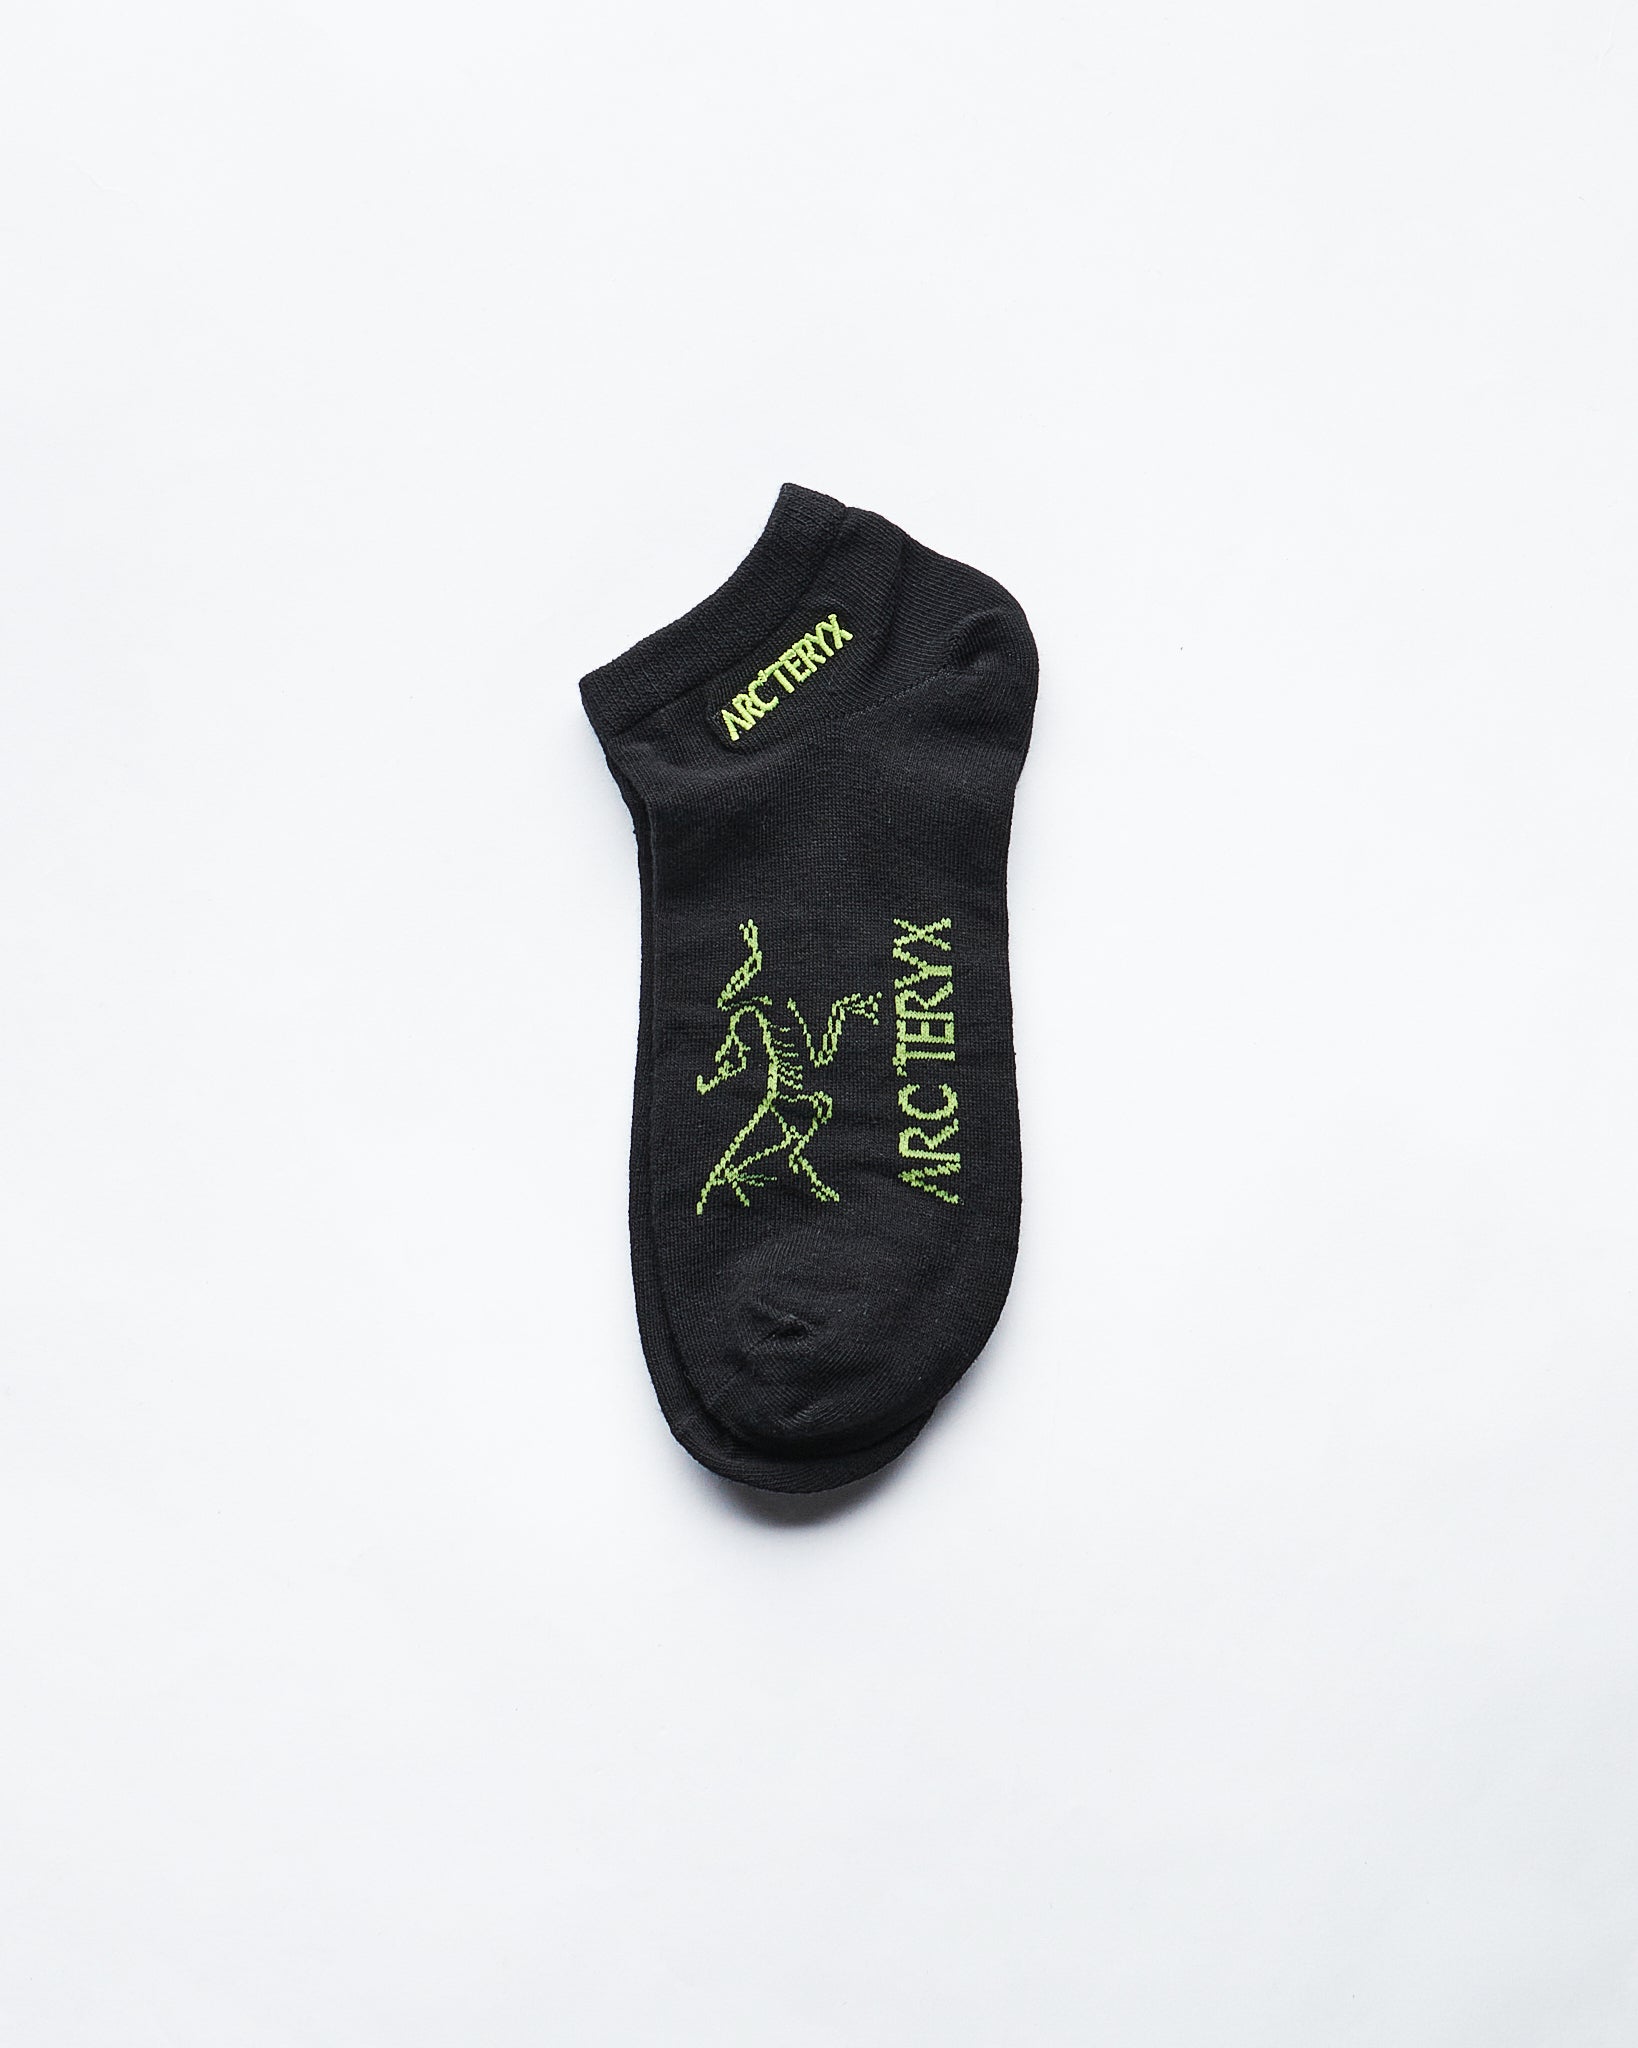 MOI OUTFIT-Arcteryx 5 Pairs Low Cut Socks 13.90